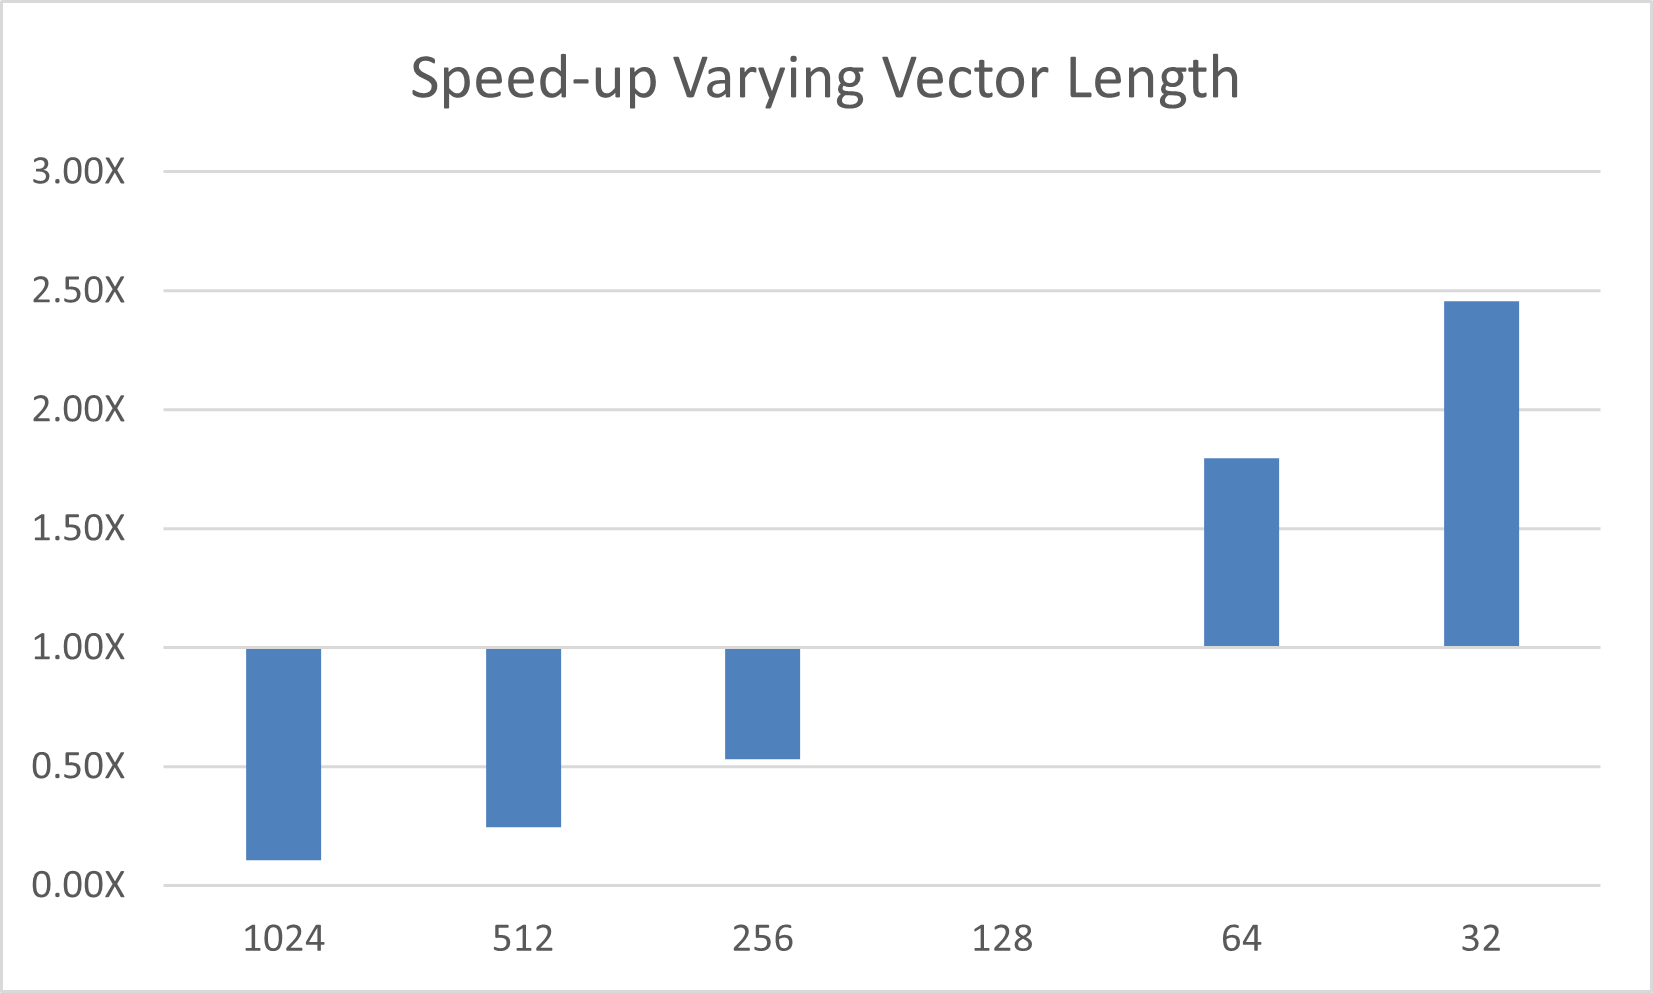 Relative speed-up from varying vector_length from the default value of 128